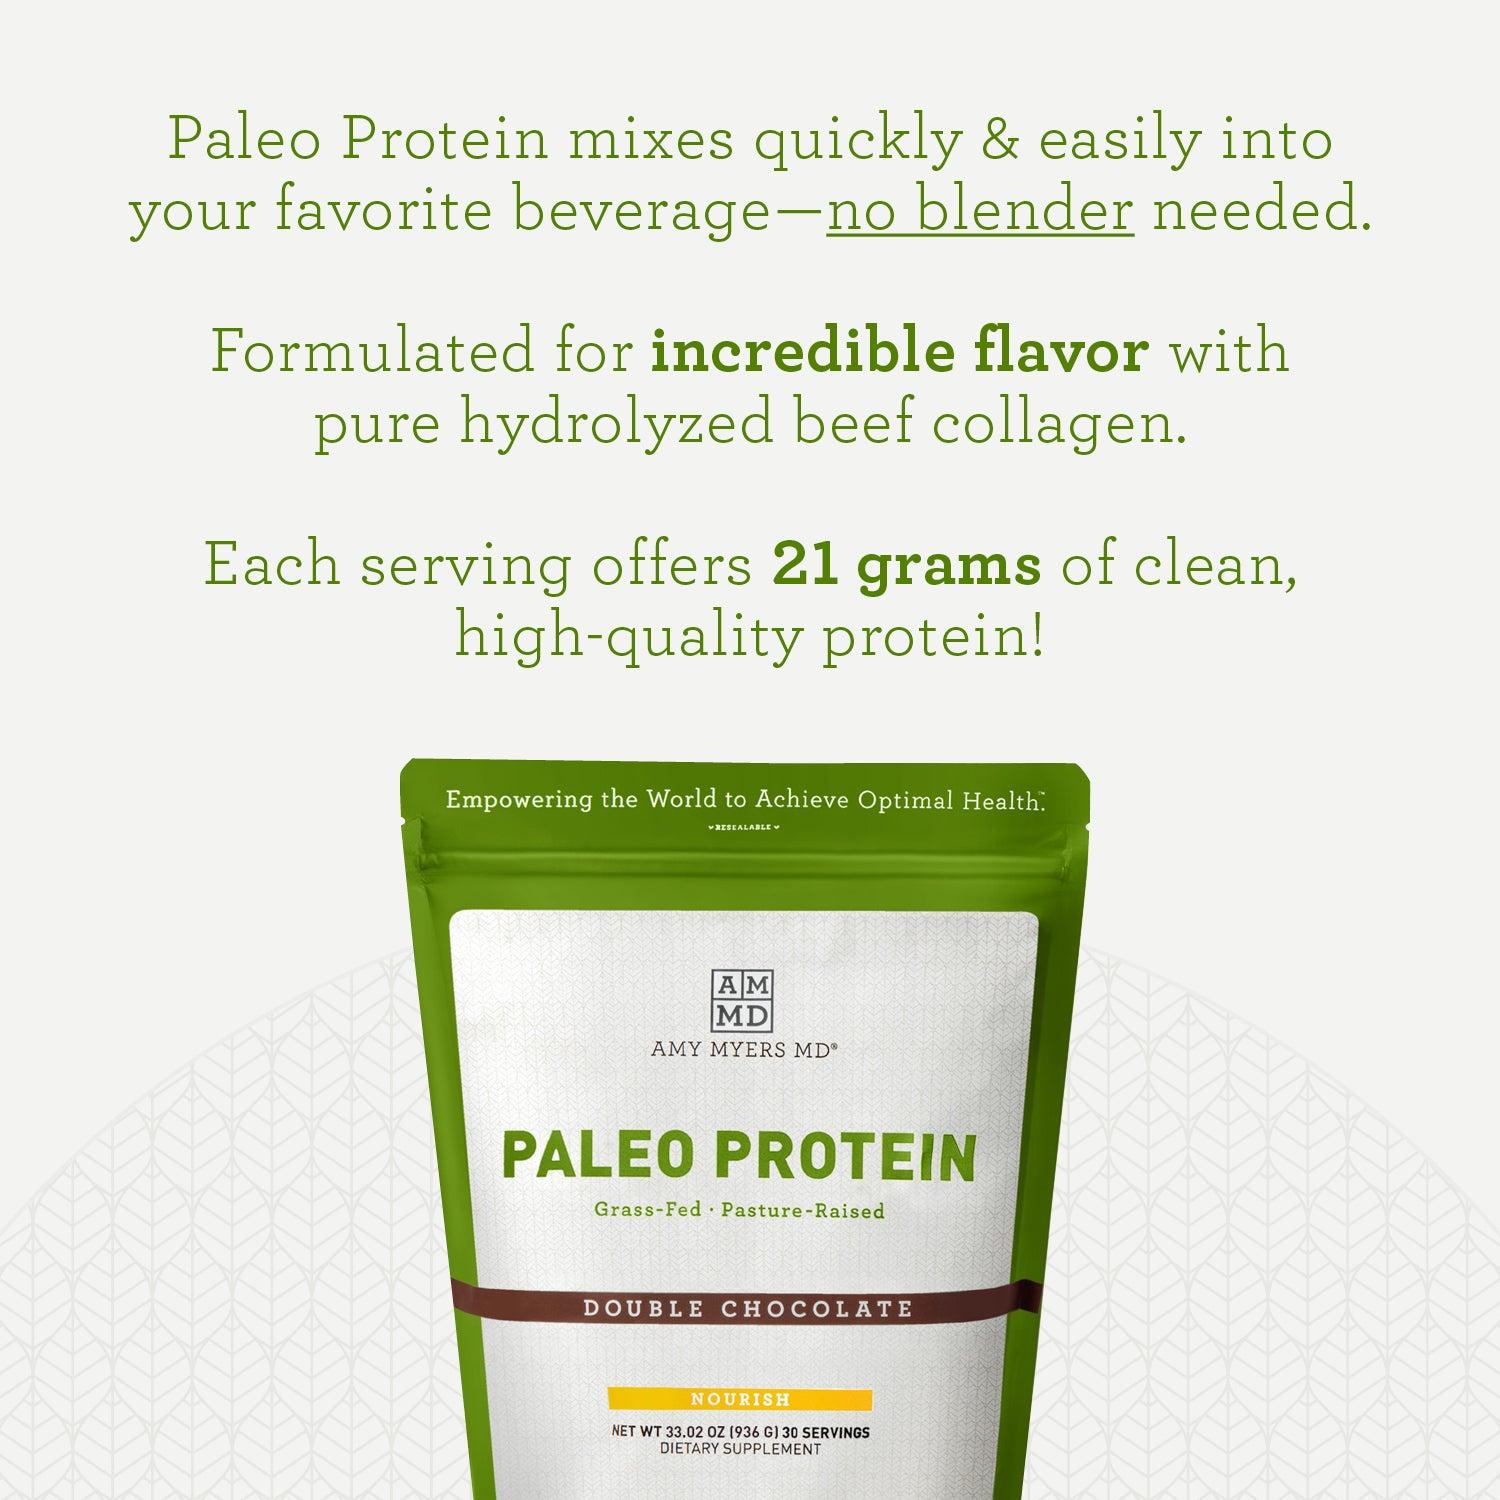 Infographic of Paleo Protein Double Chocolate - Paleo Protein mixes quickly & easily into your favorite beverage-no blender needed. Formulated for incredinble flavor with pure hydrolyzed beef collagen. Each serving offers 21 grams of clean high-quality protein!